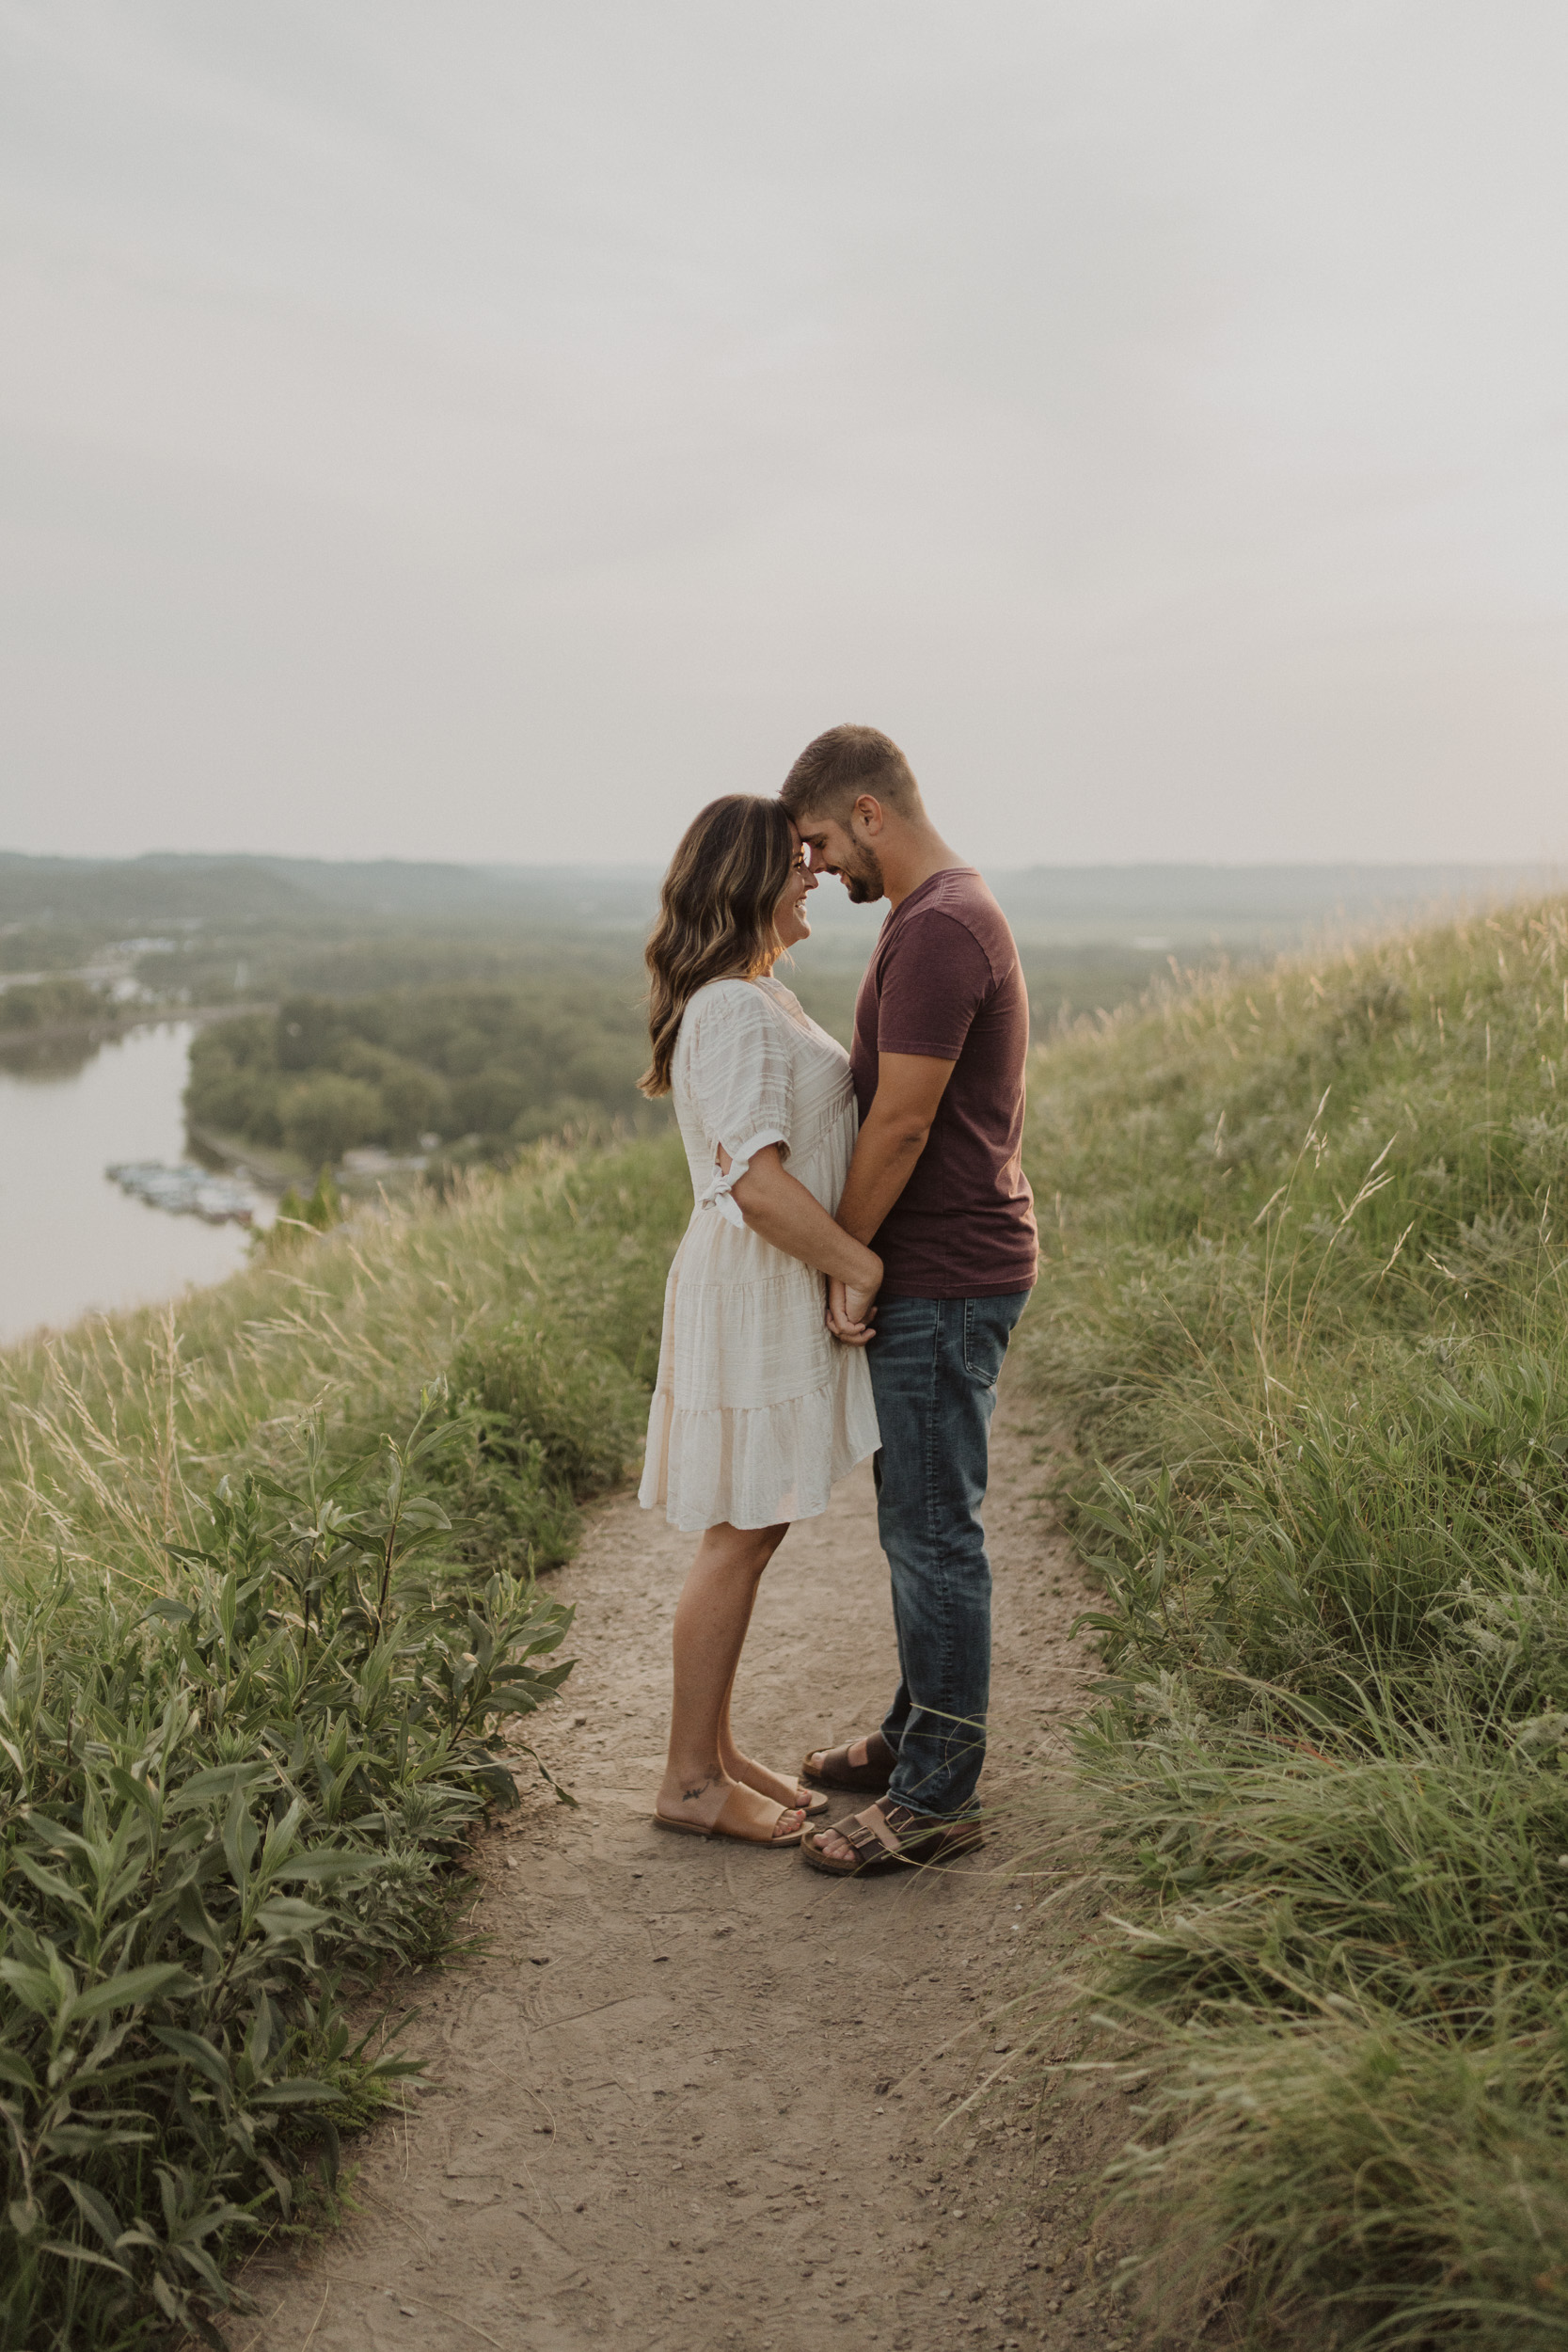 Caught golden hour at the top of bluffs in Redwing Minnesota for this adorable couple's engagement photos